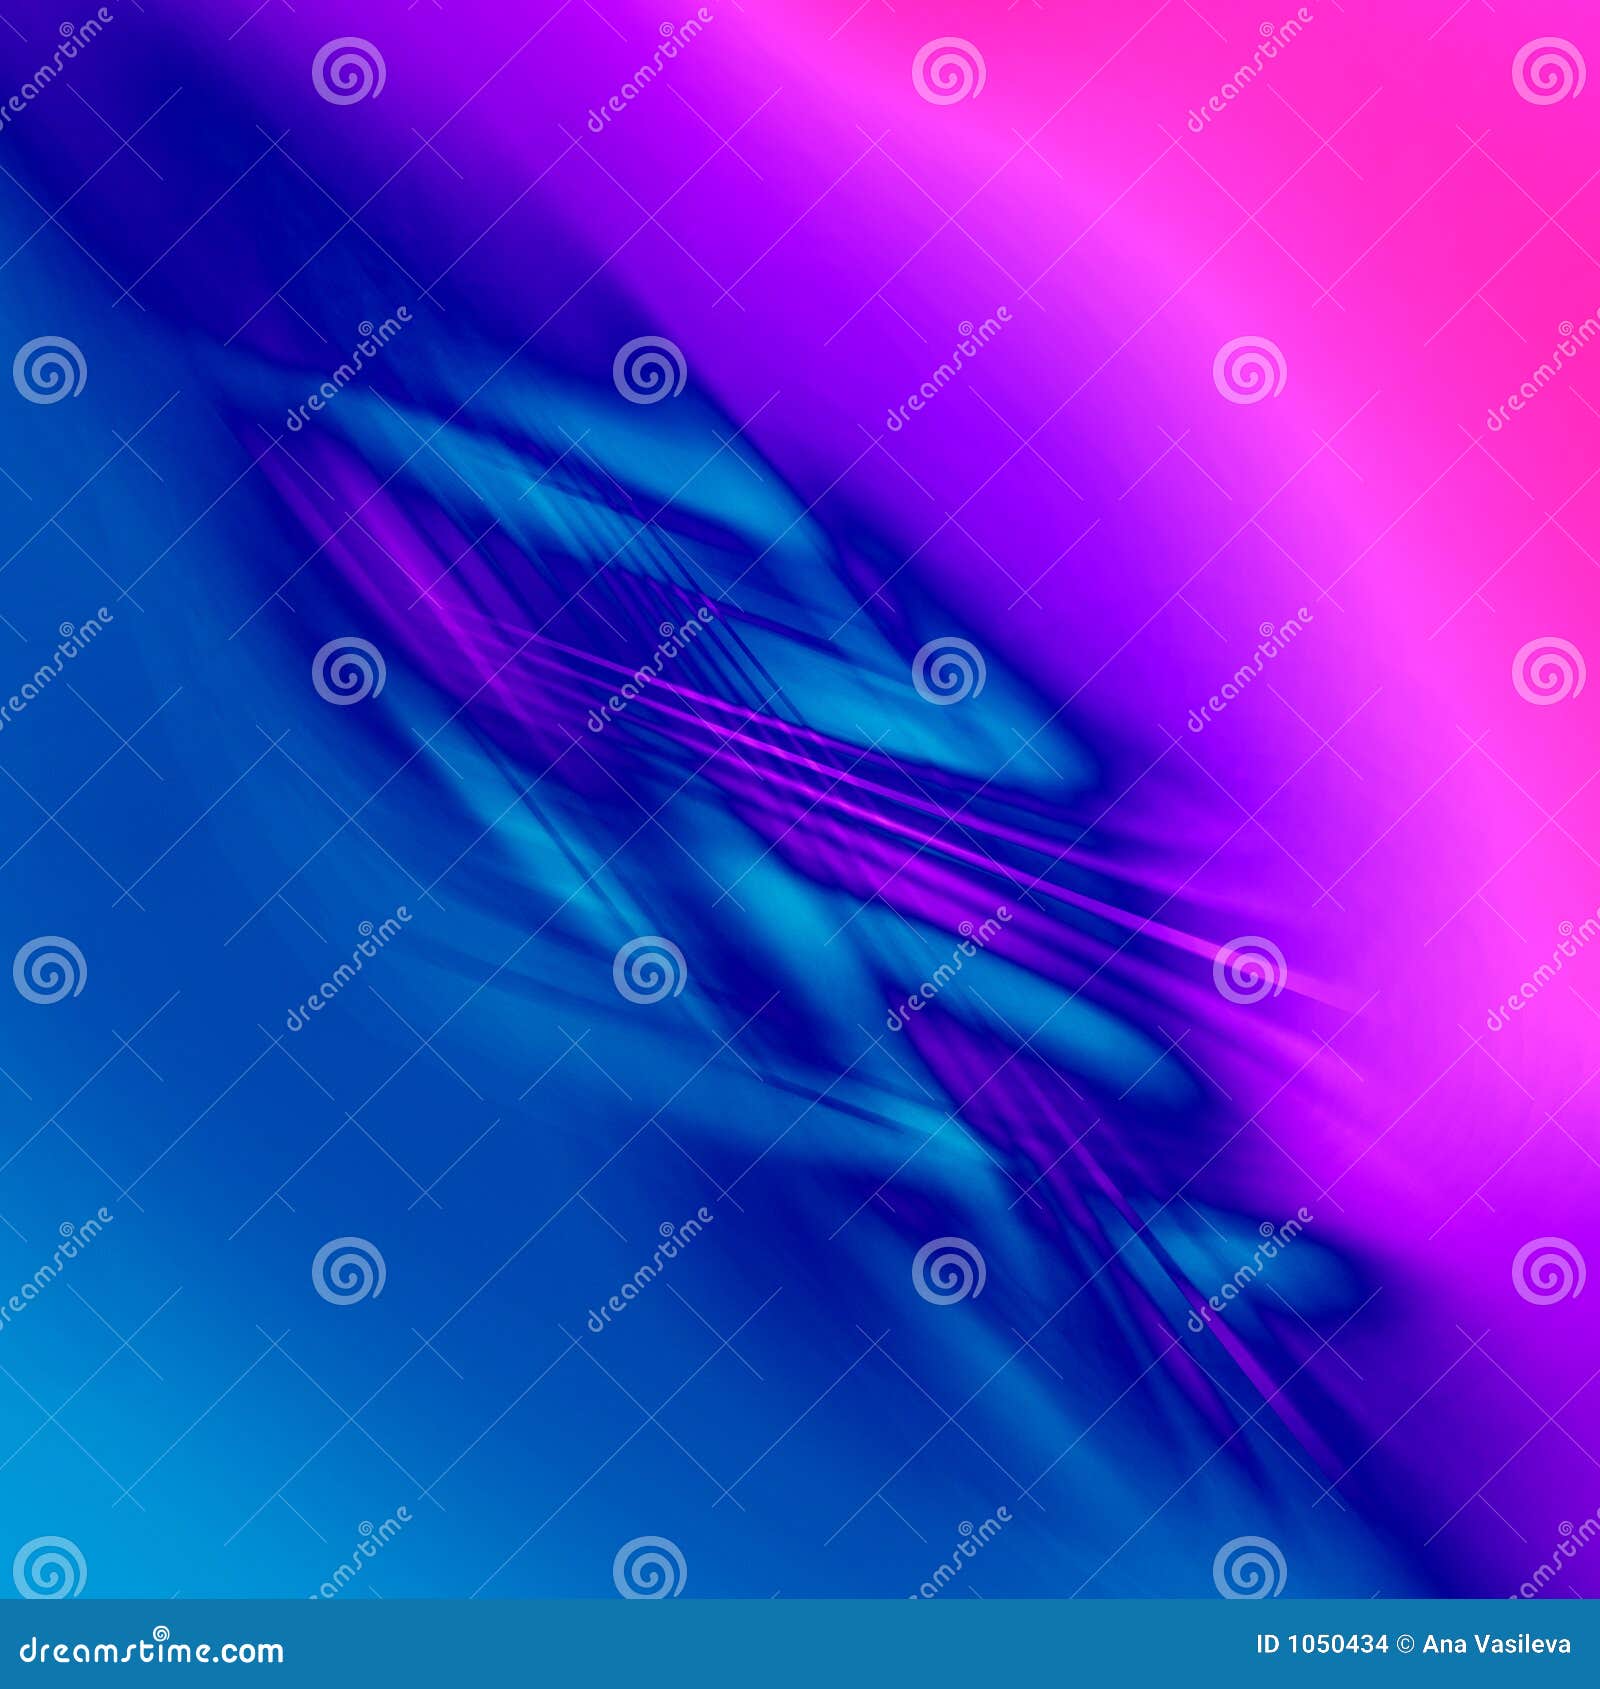 abstract colorful background - dividing line. computer